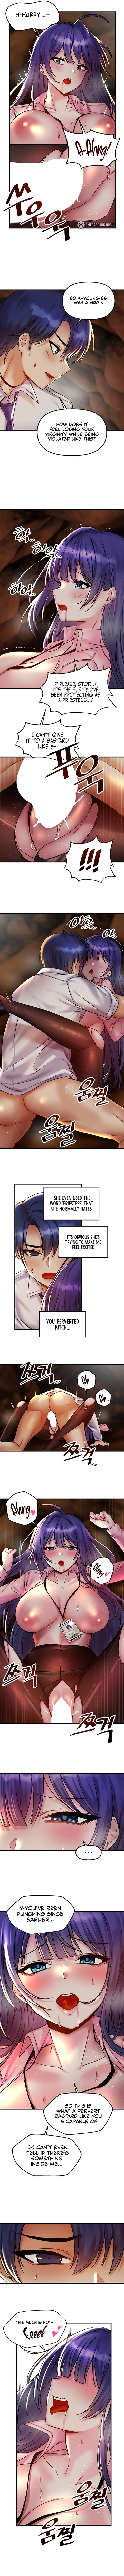 trapped-in-the-academys-eroge-chap-30-3